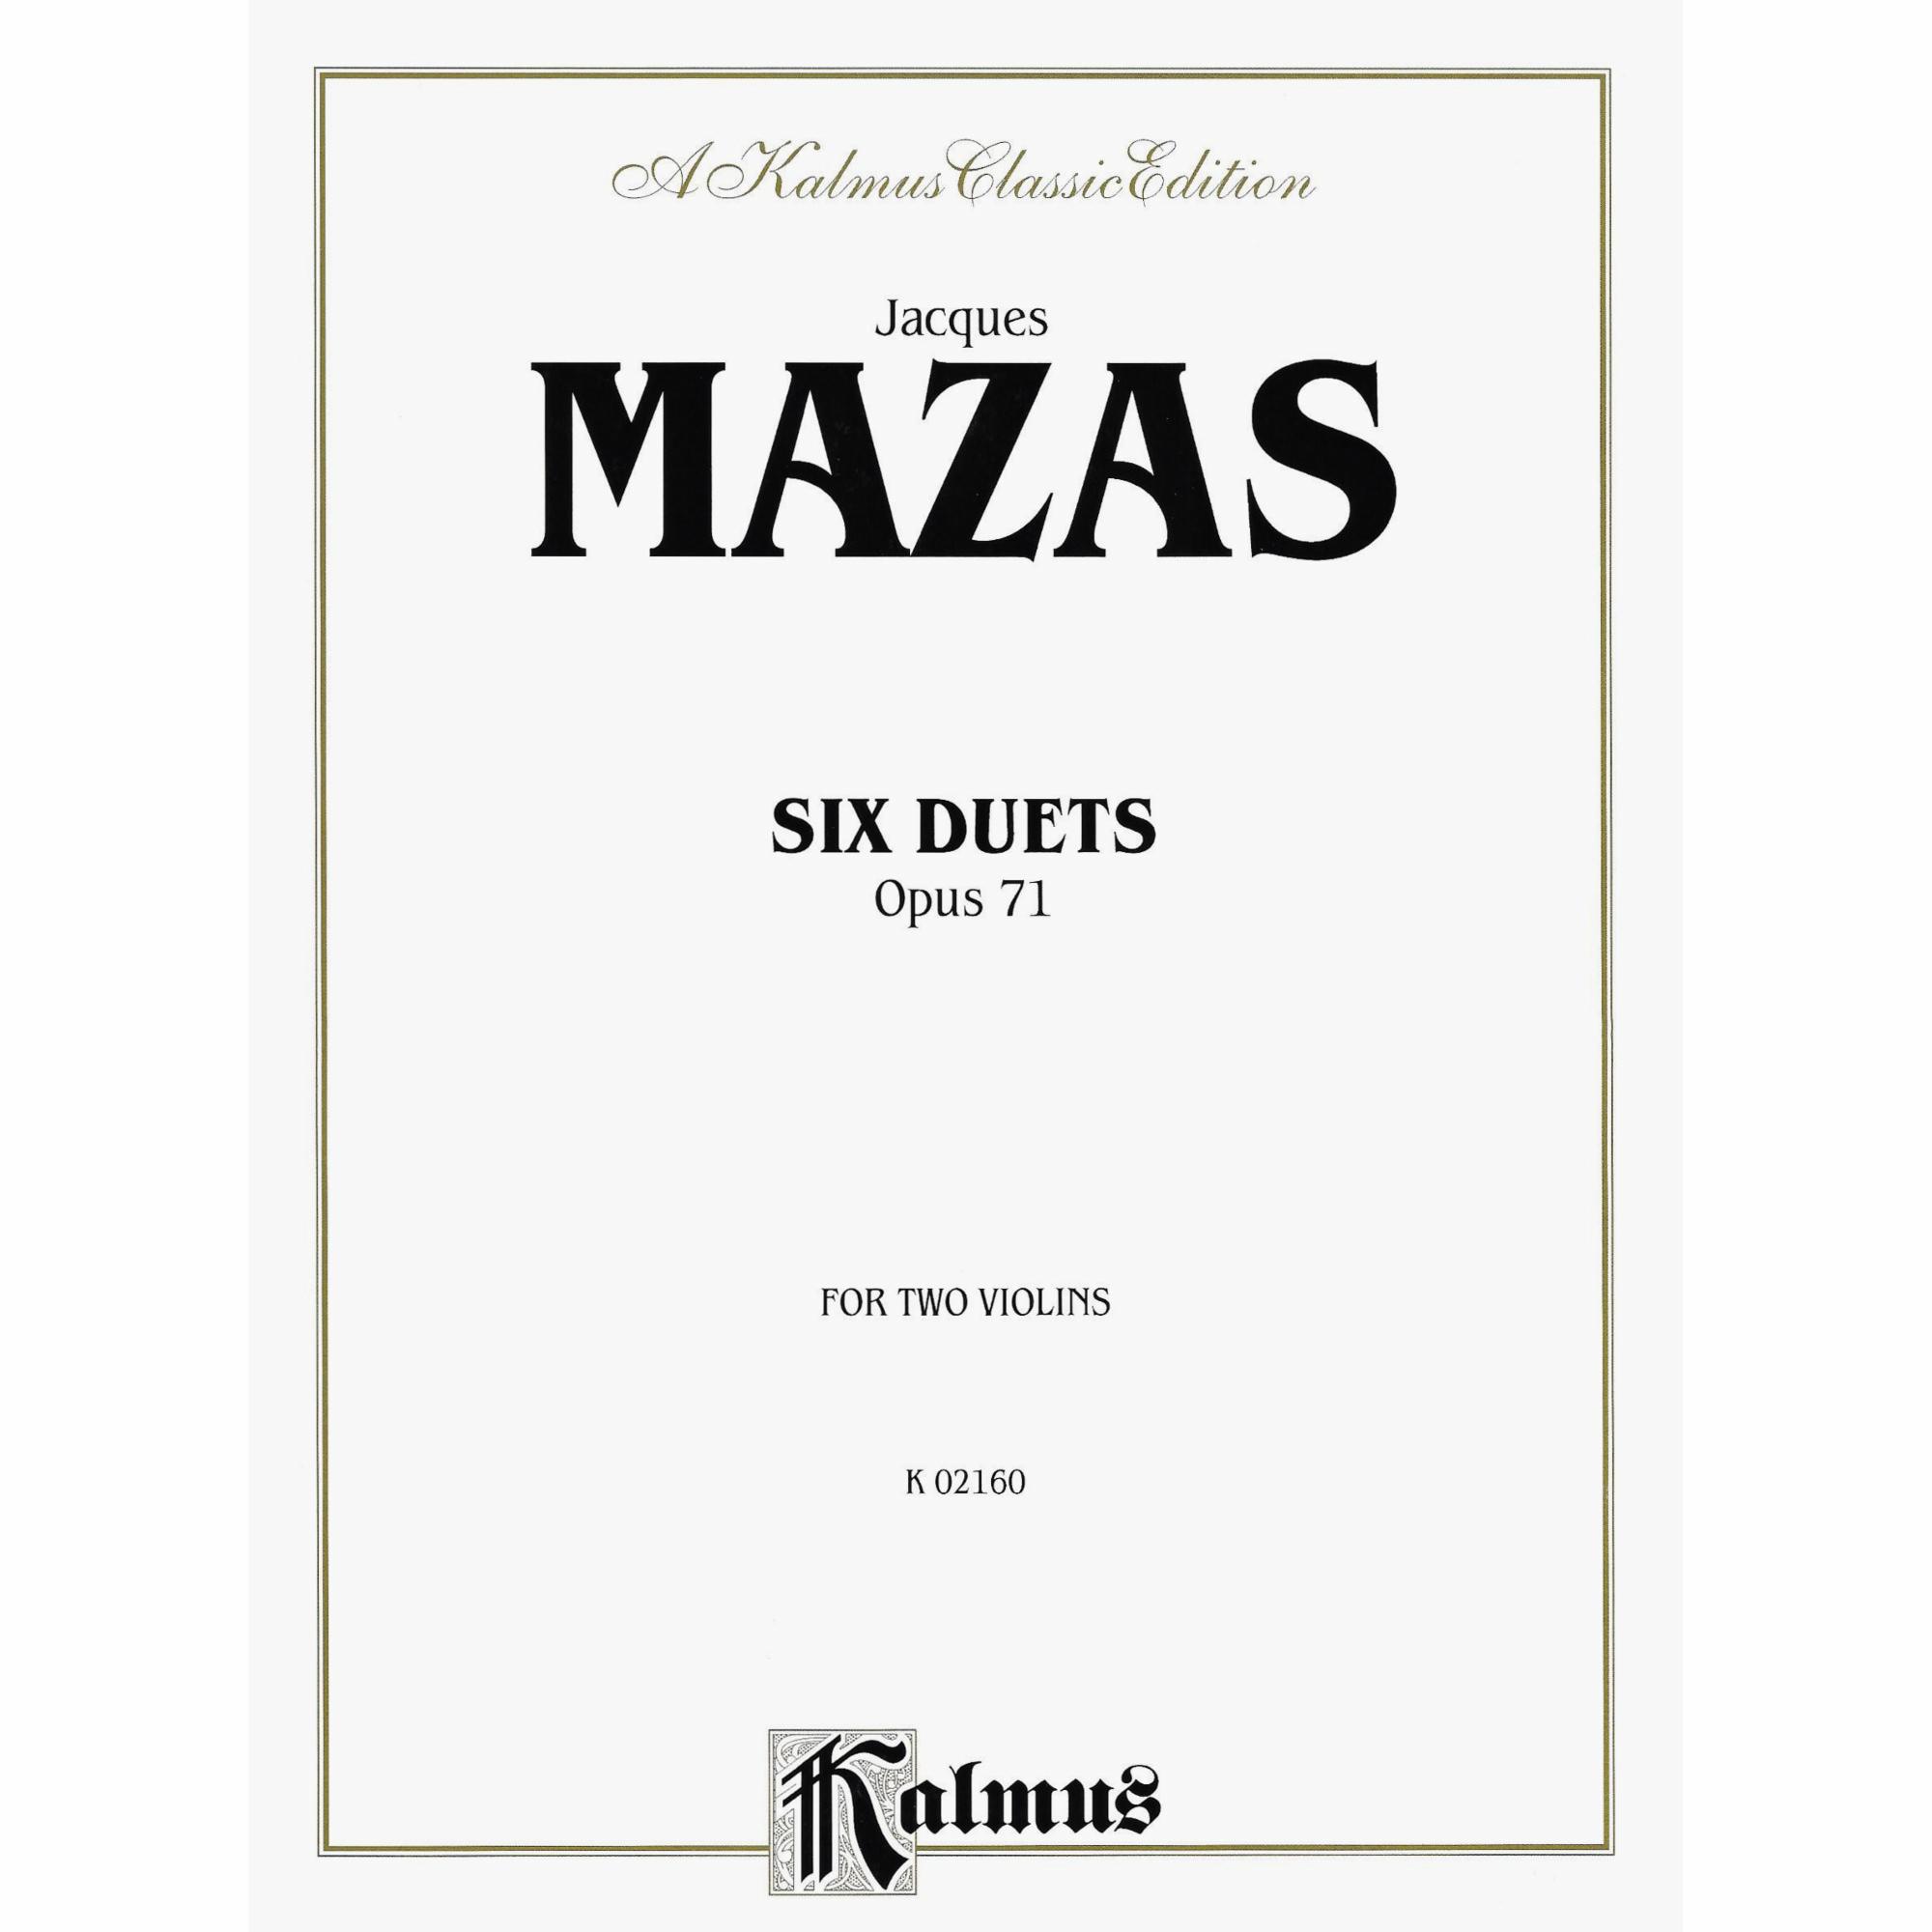 Mazas -- Six Duets, Op. 71 for Two Violins